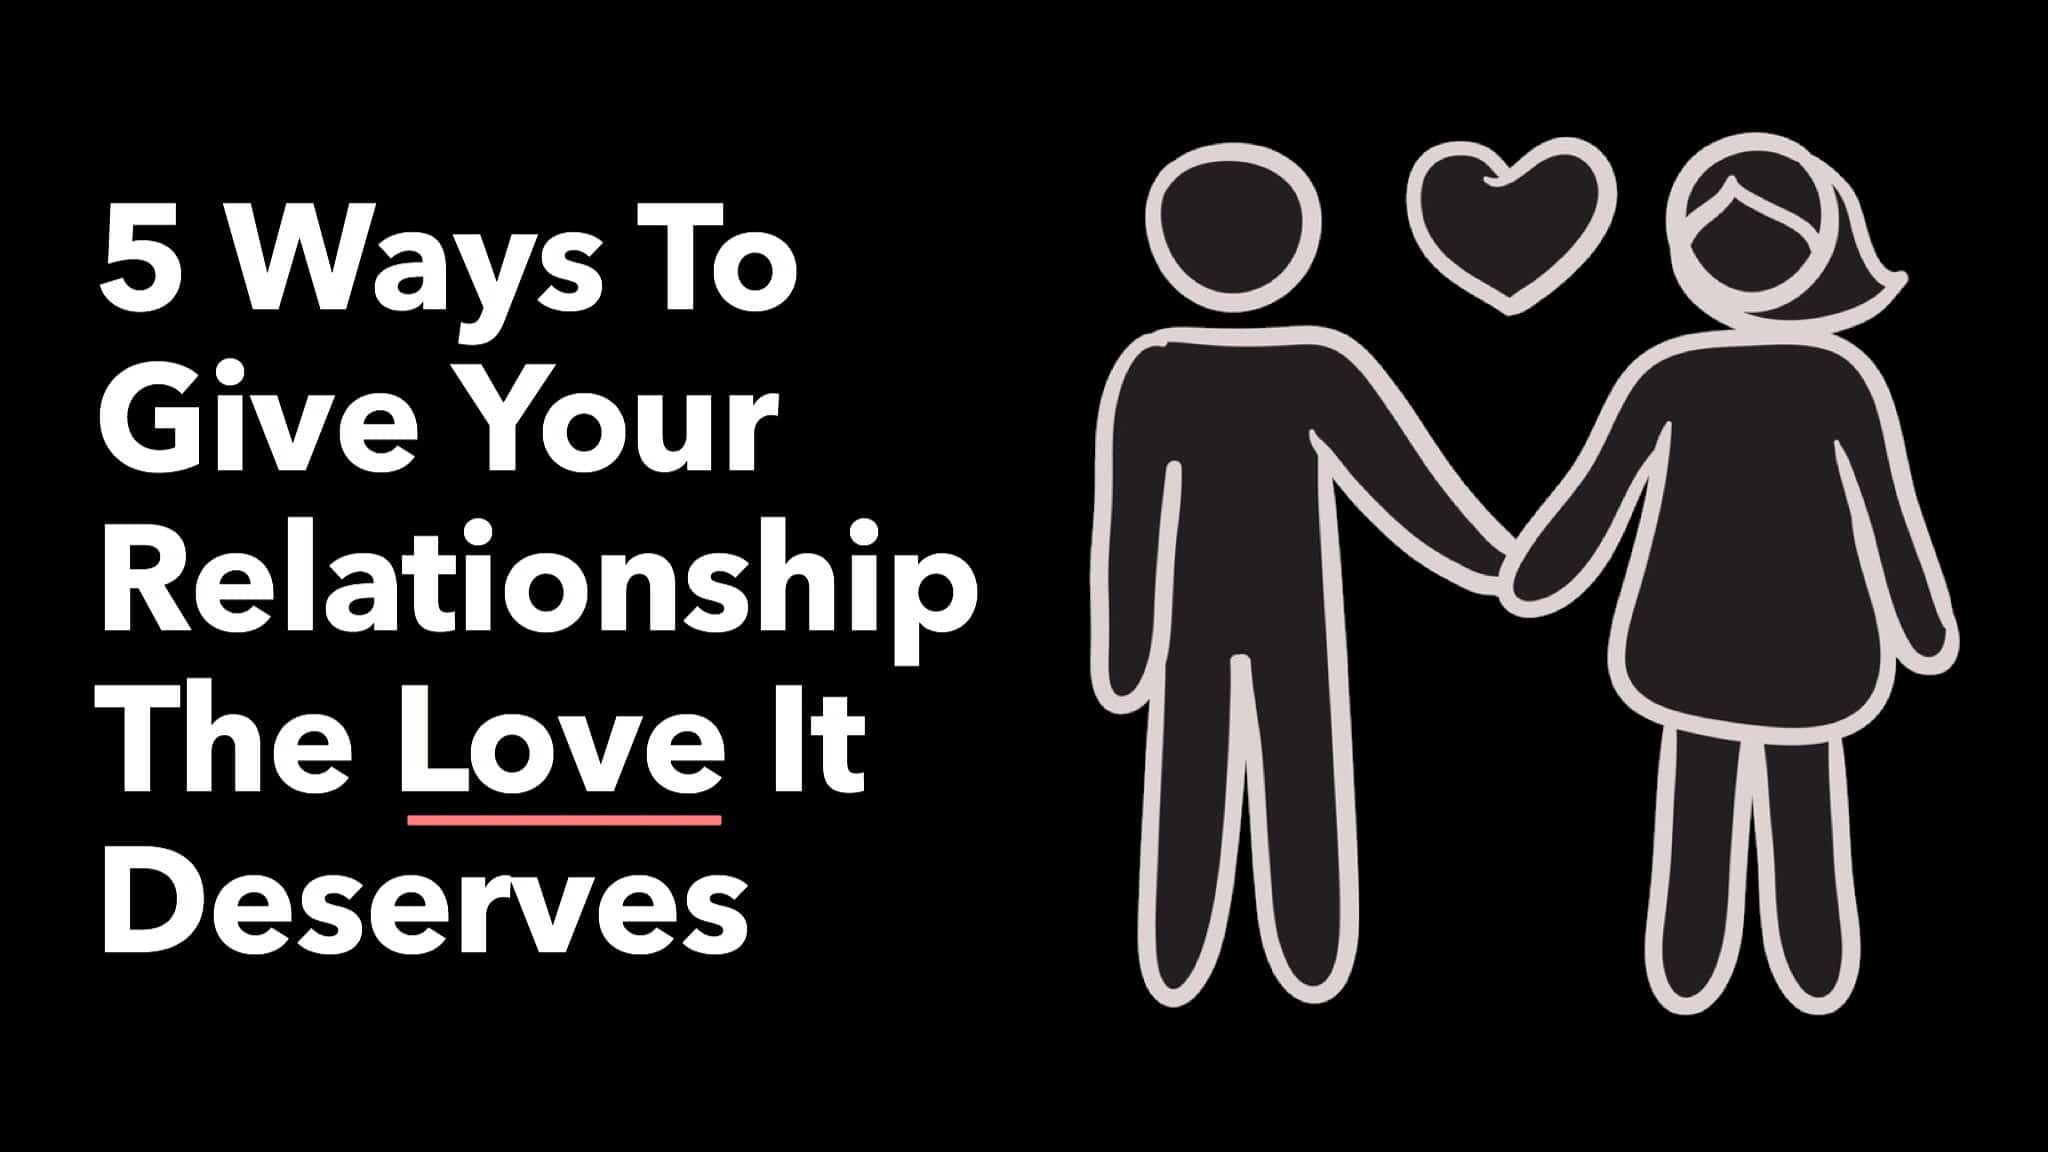 5 Ways To Give Your Relationship The Love It Deserves